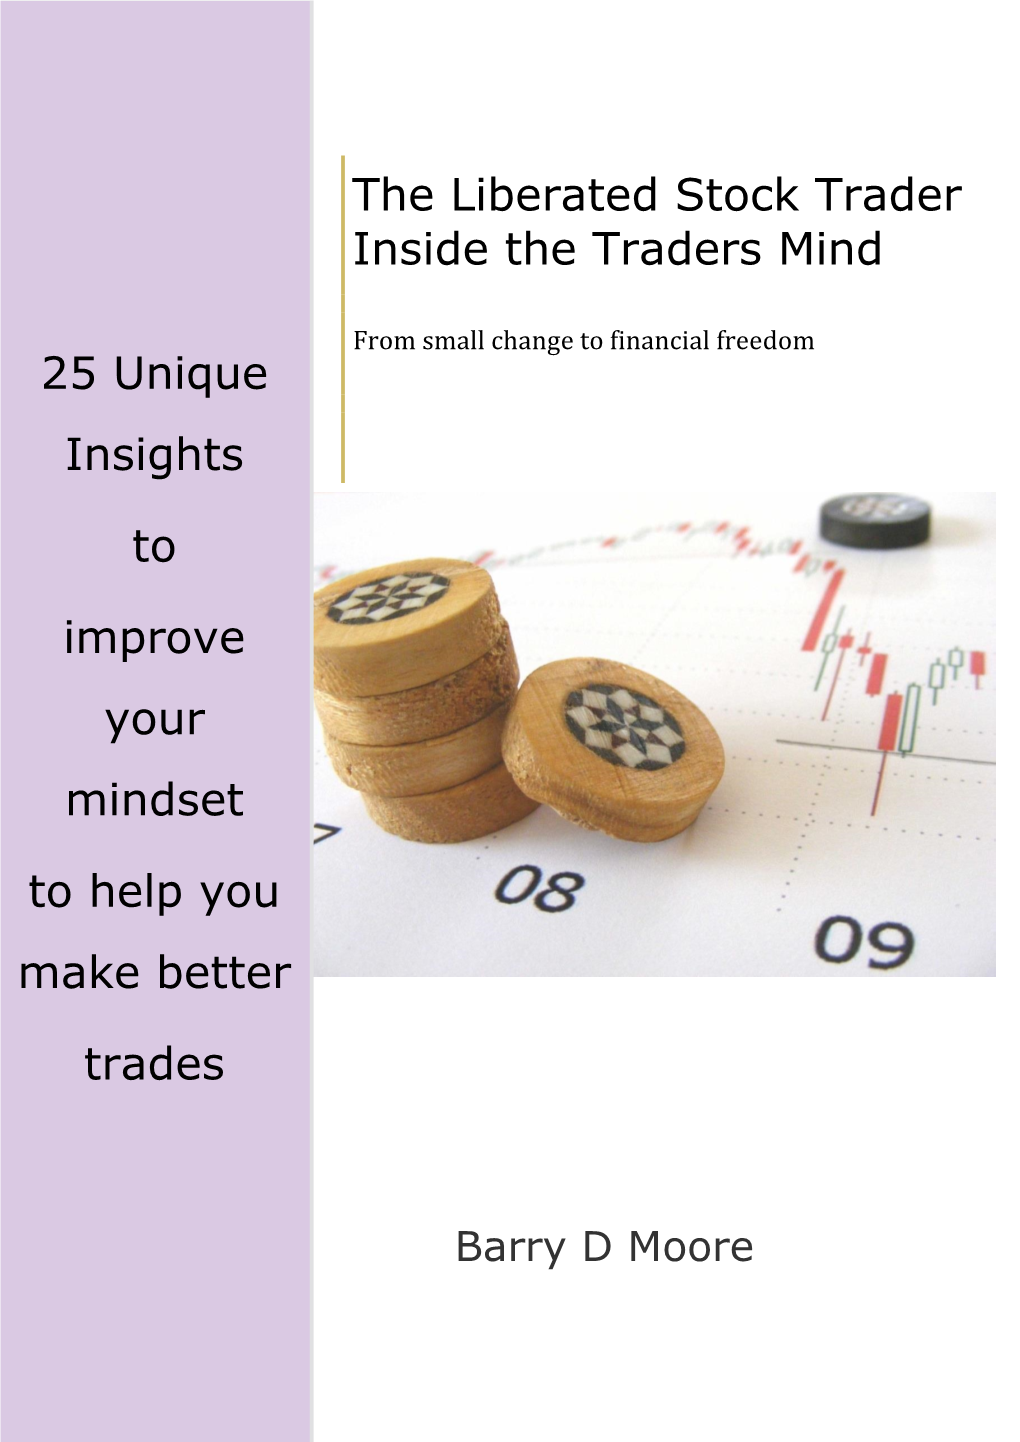 The Liberated Stock Trader Inside the Traders Mind